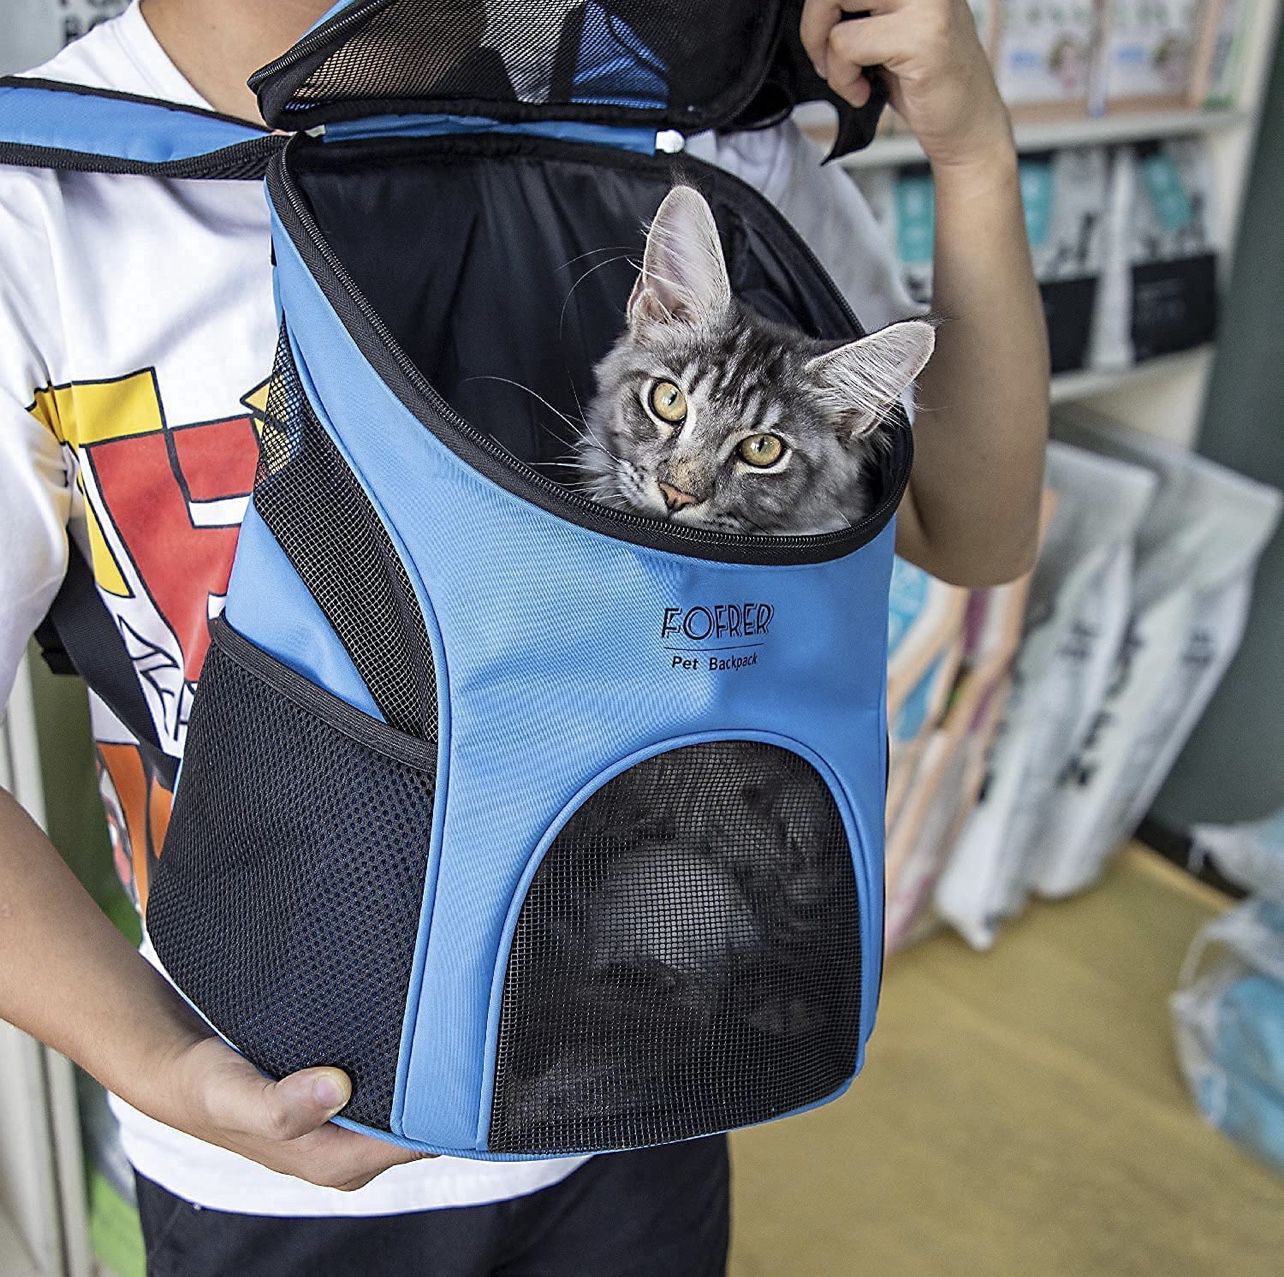 Dog Carrier Backpacks for Small Dogs, Cat Backpack with Breathable Mesh Ventilated Design